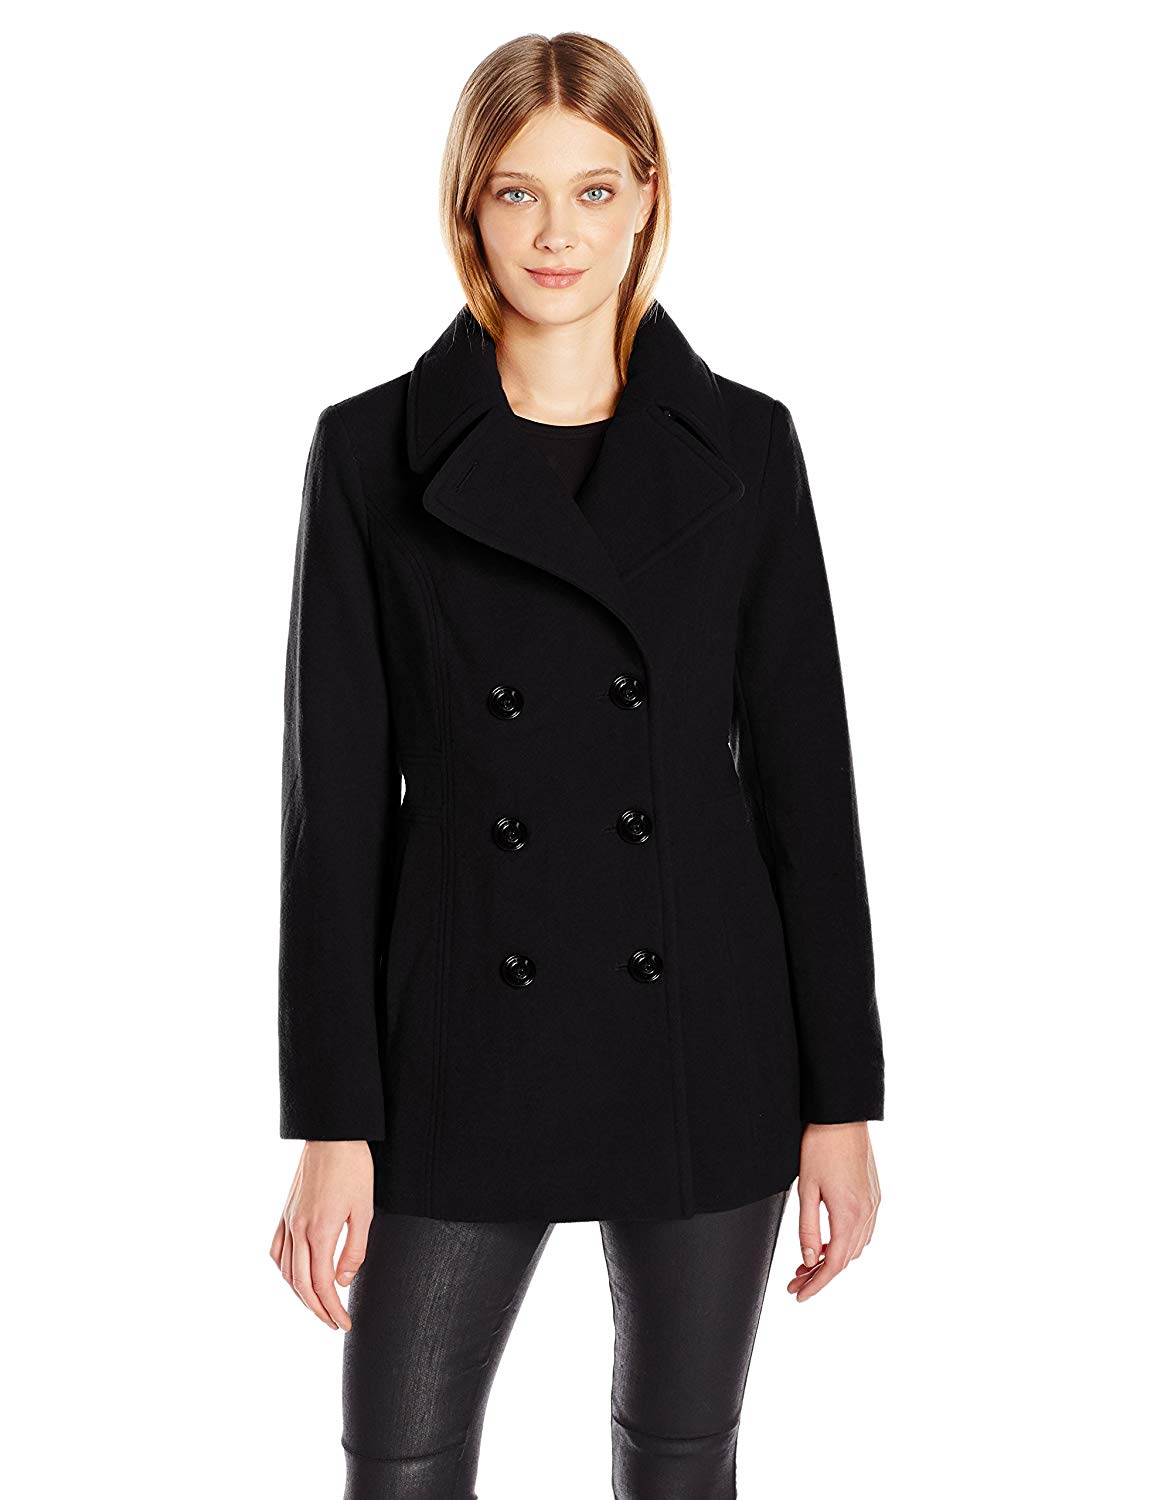 London Fog Women's Double Breasted Peacoat with Scarf, Black,, Black ...